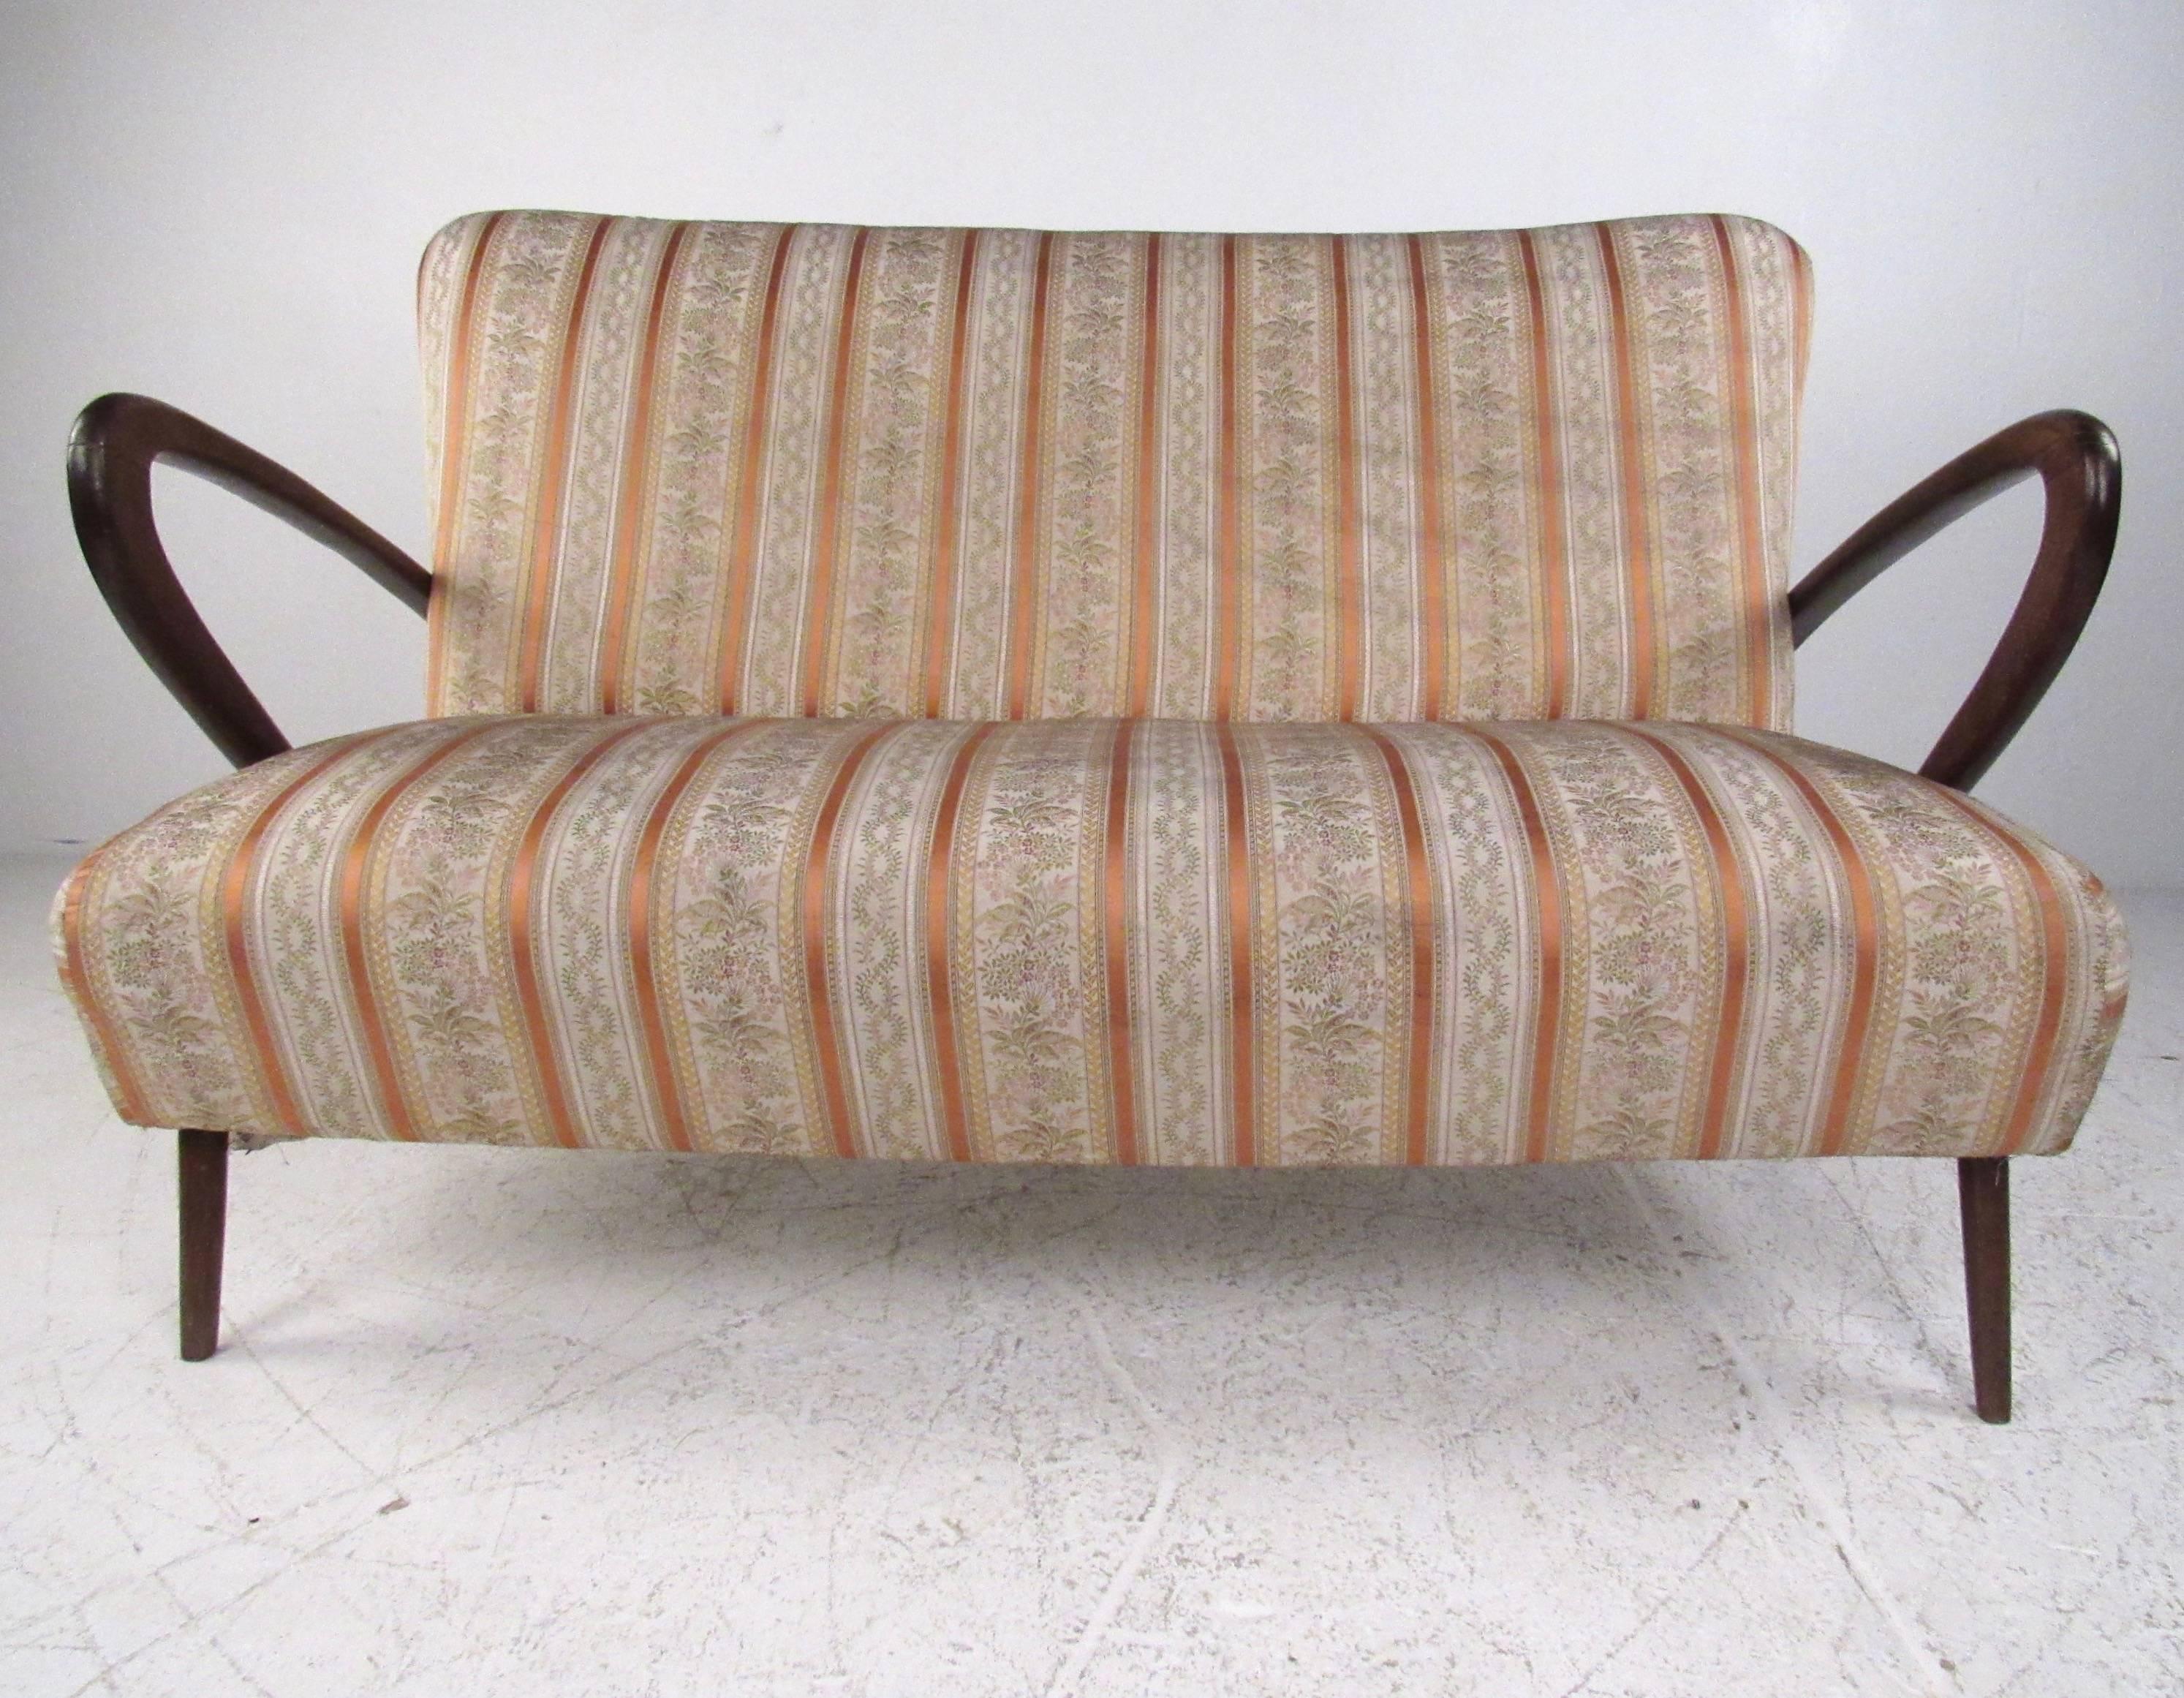 This stunning two seat settee features sculpted hardwood arms with sleek and delicate legs. Unique vintage fabric adds to the mid-century appeal of this elegant Italian love seat. Matching arm chairs available, please confirm item location (NY or